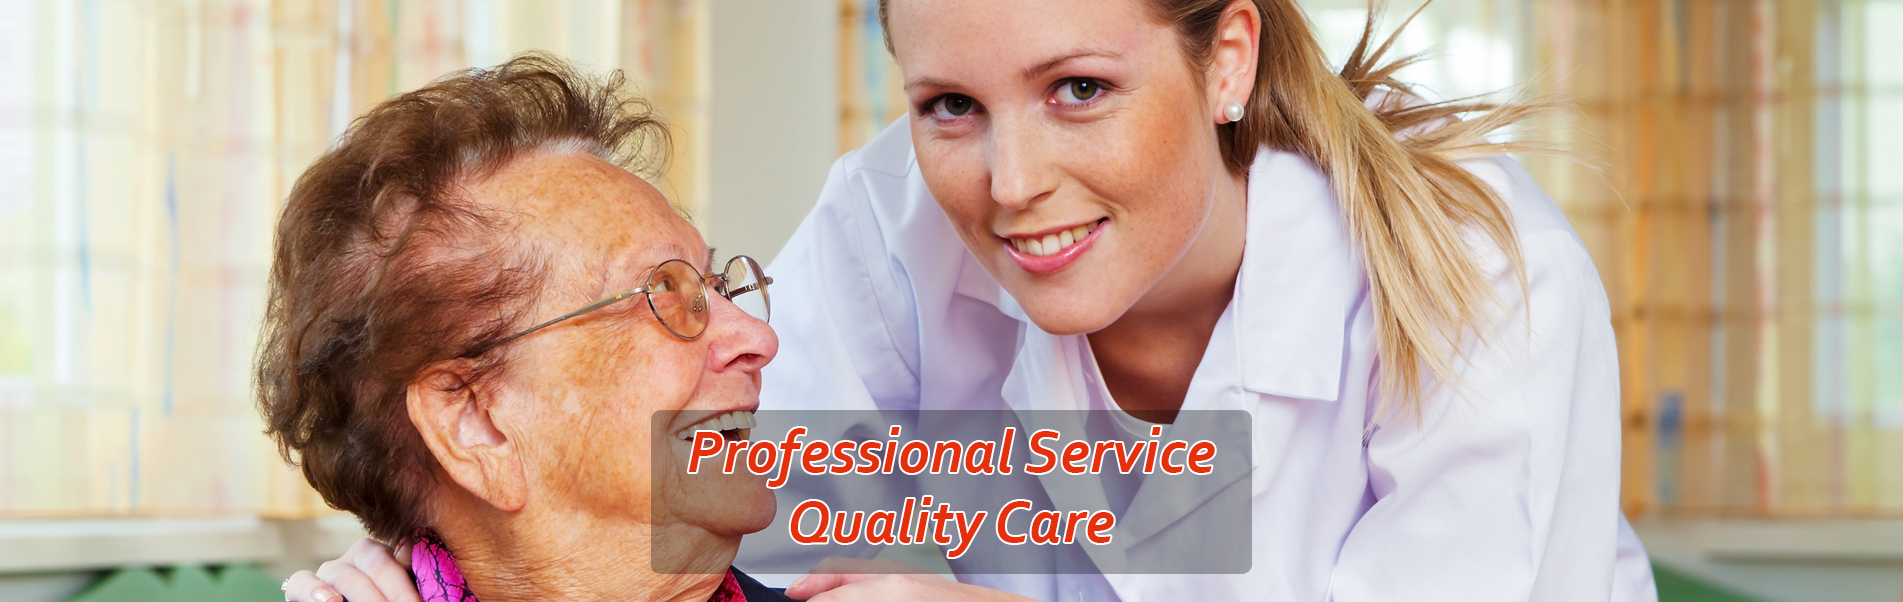 Professional Service Quality Care